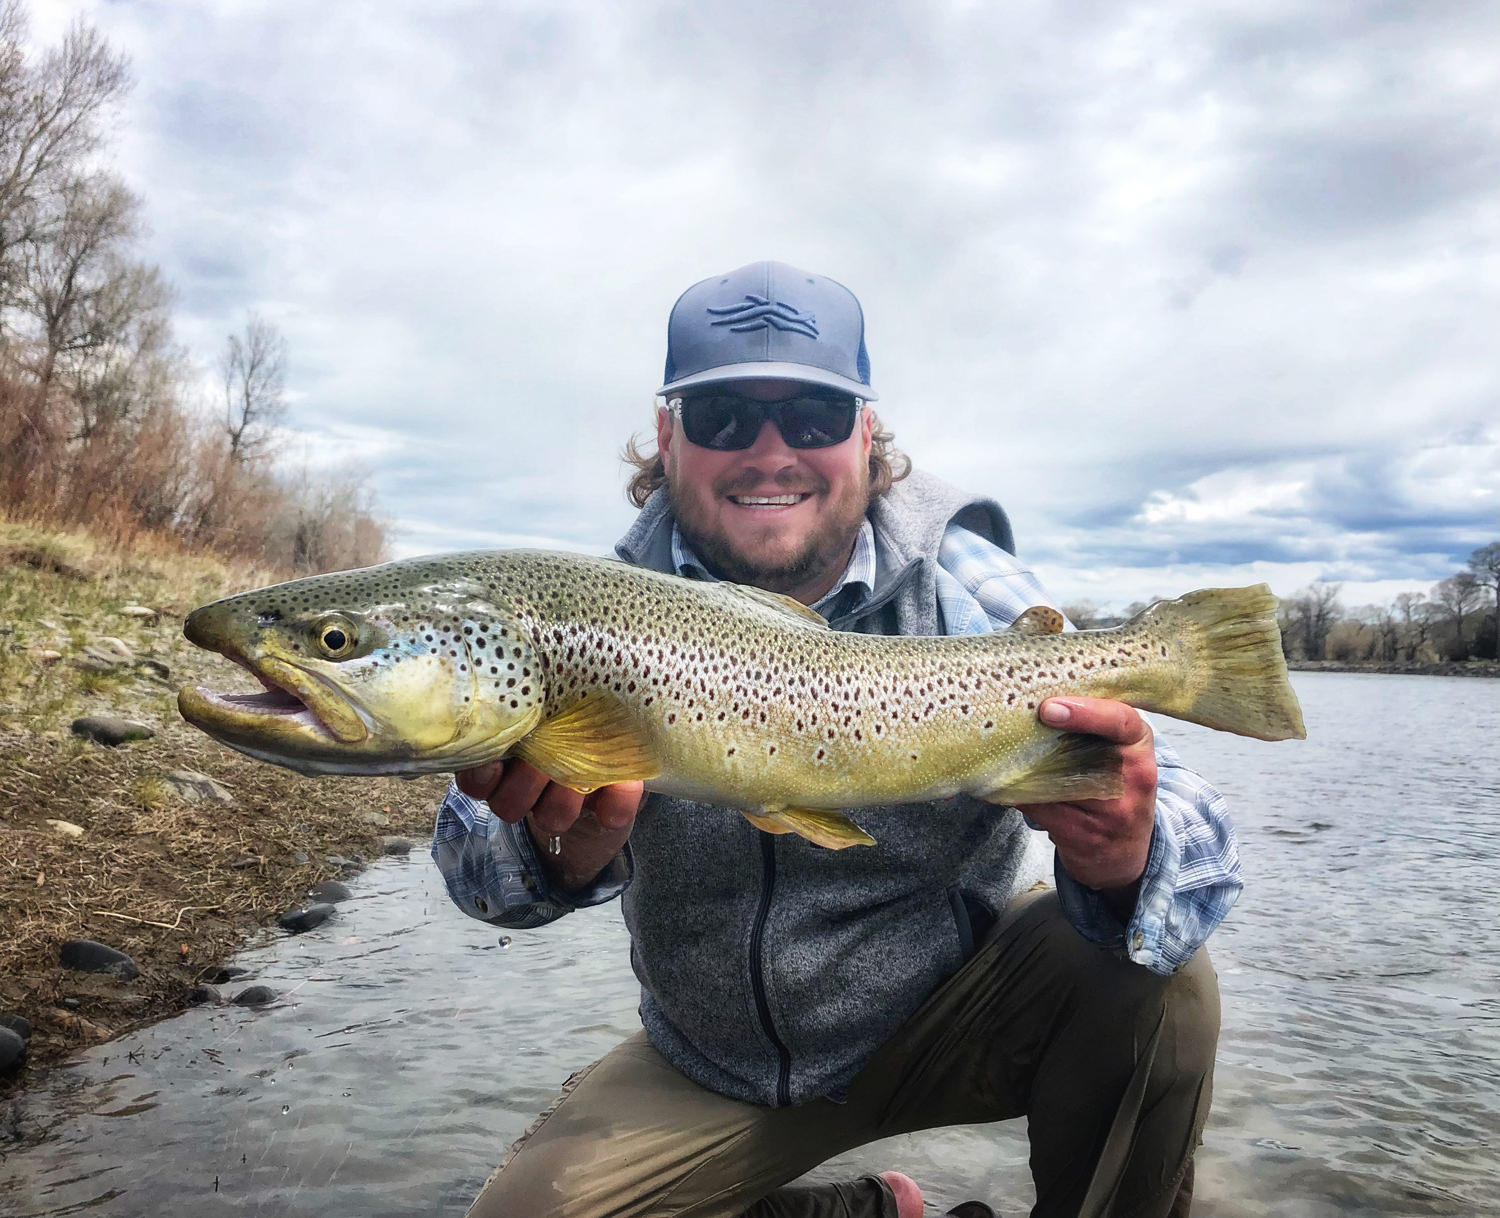 Montana Trout Company owner with large trout